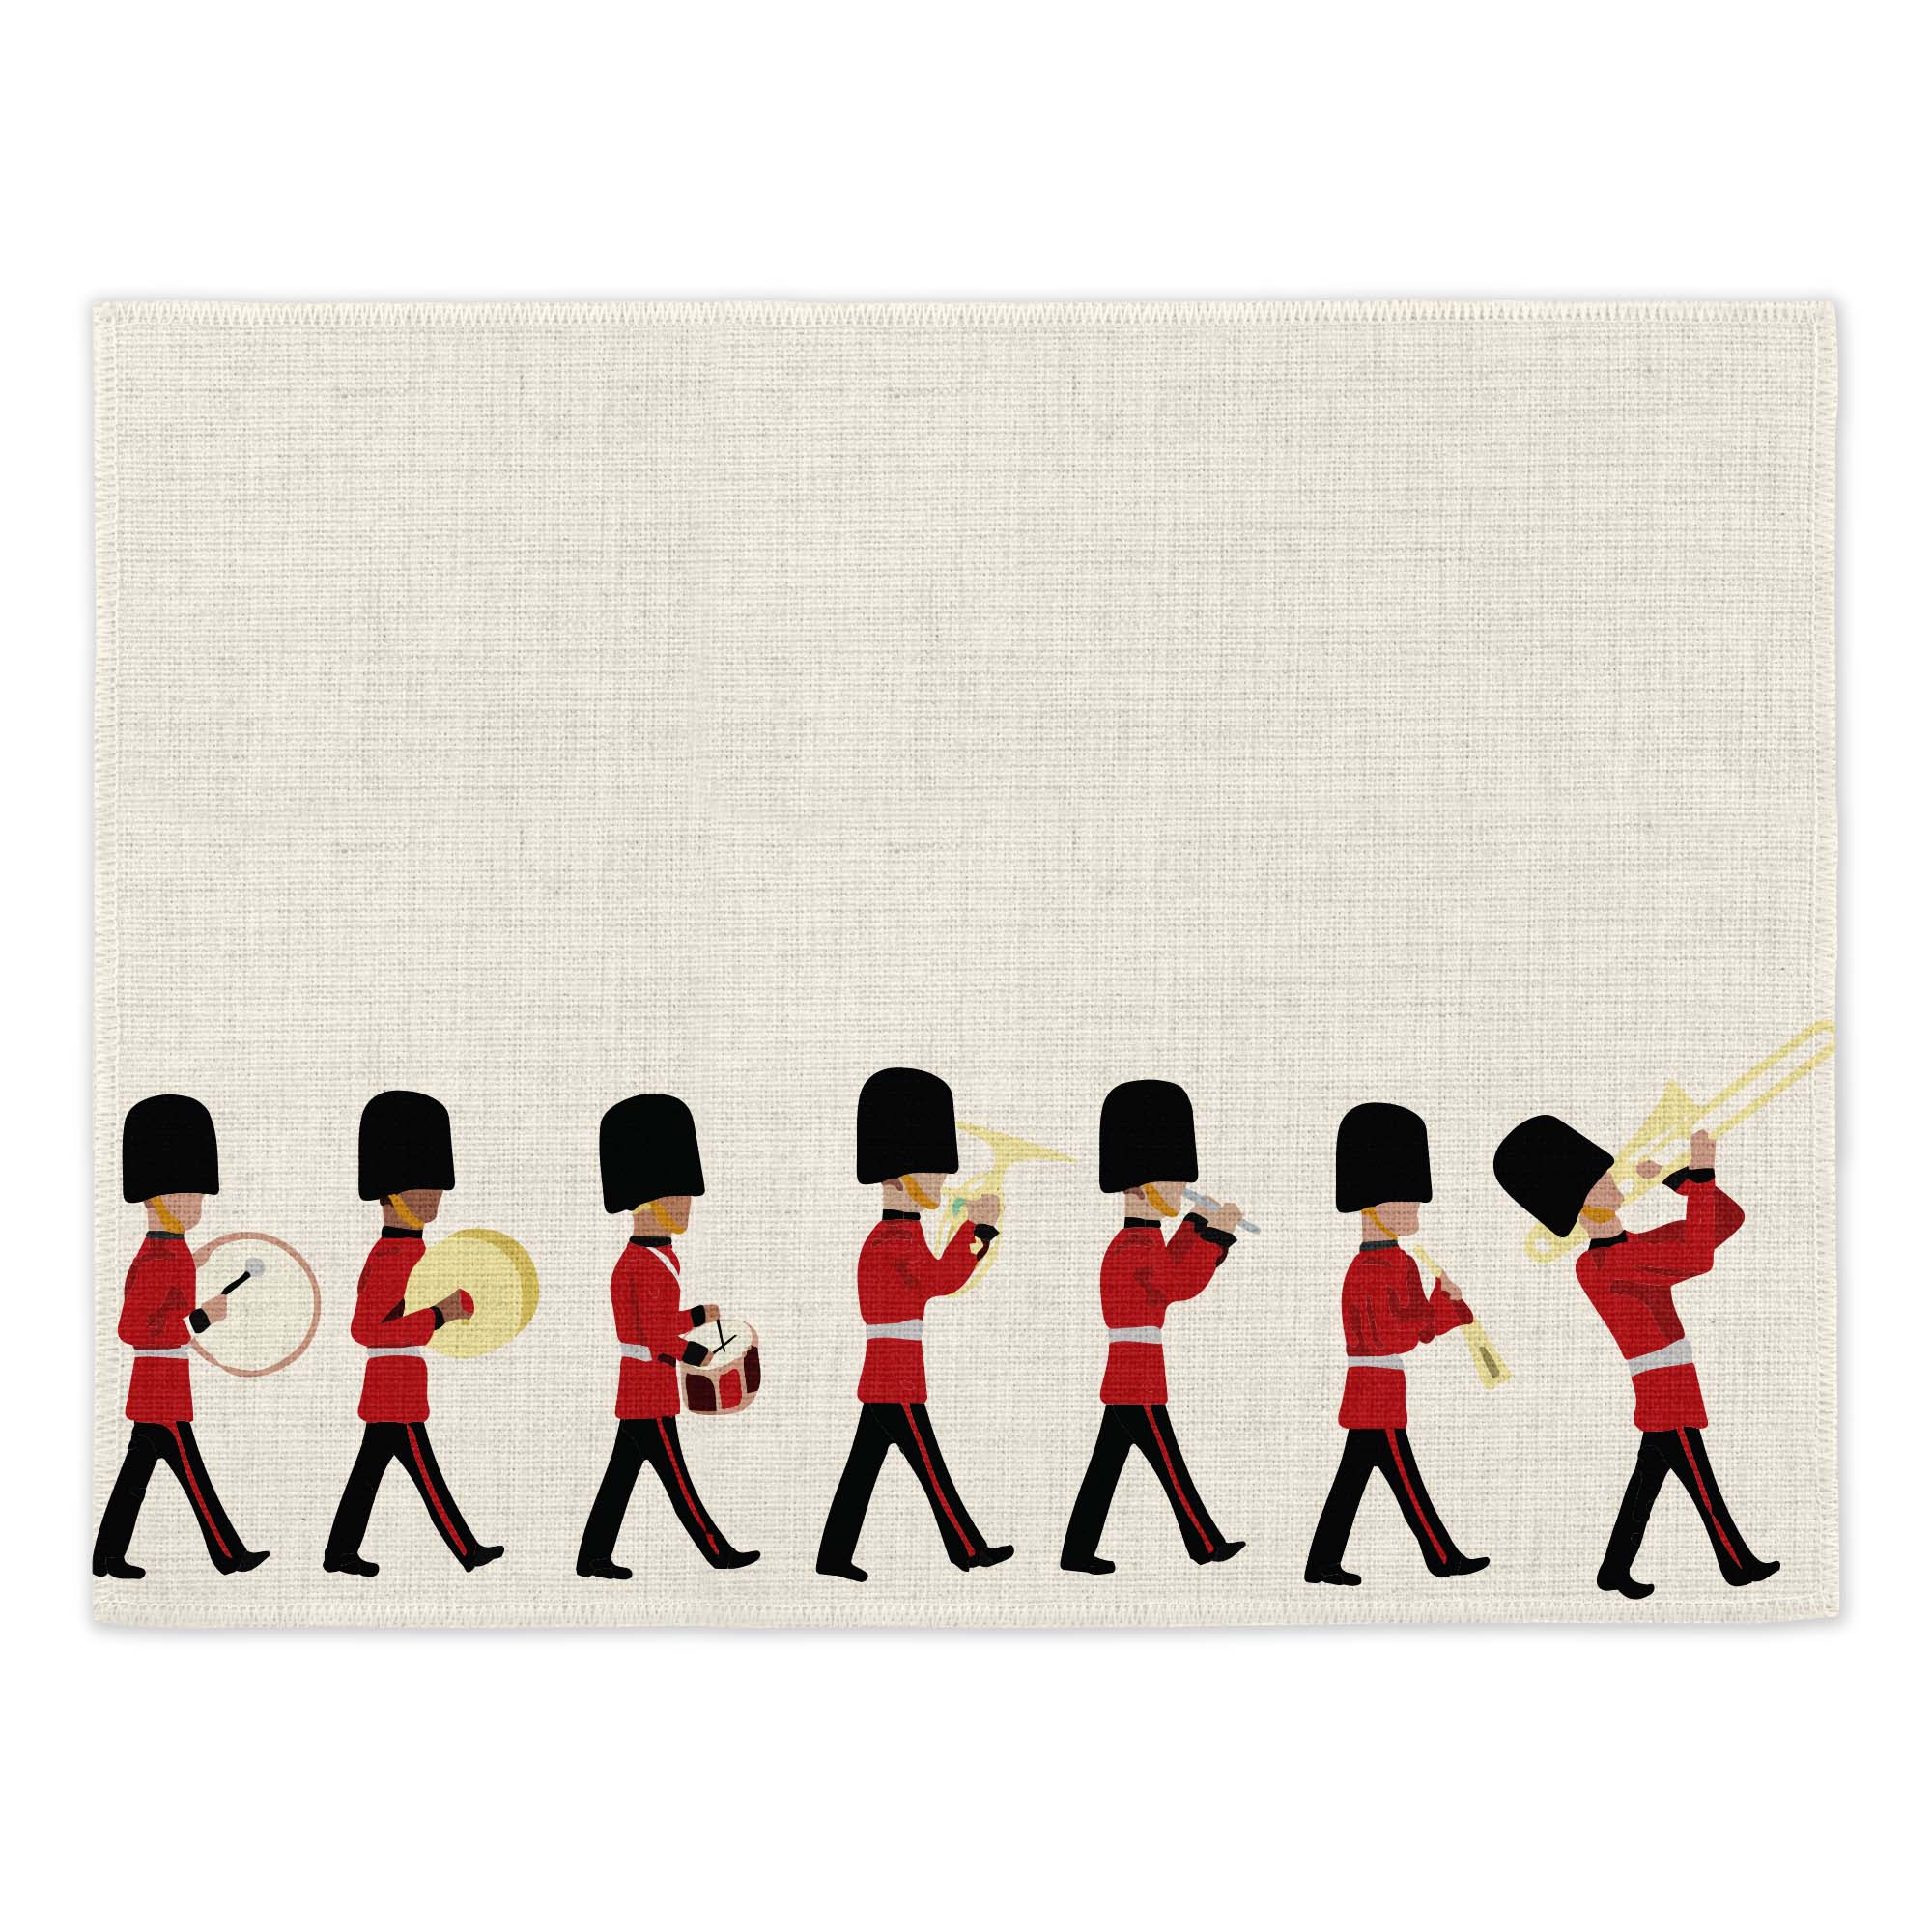 London Changing of the Guard Placemats (Set of Four) Placemats Mustard and Gray Ltd Shropshire UK